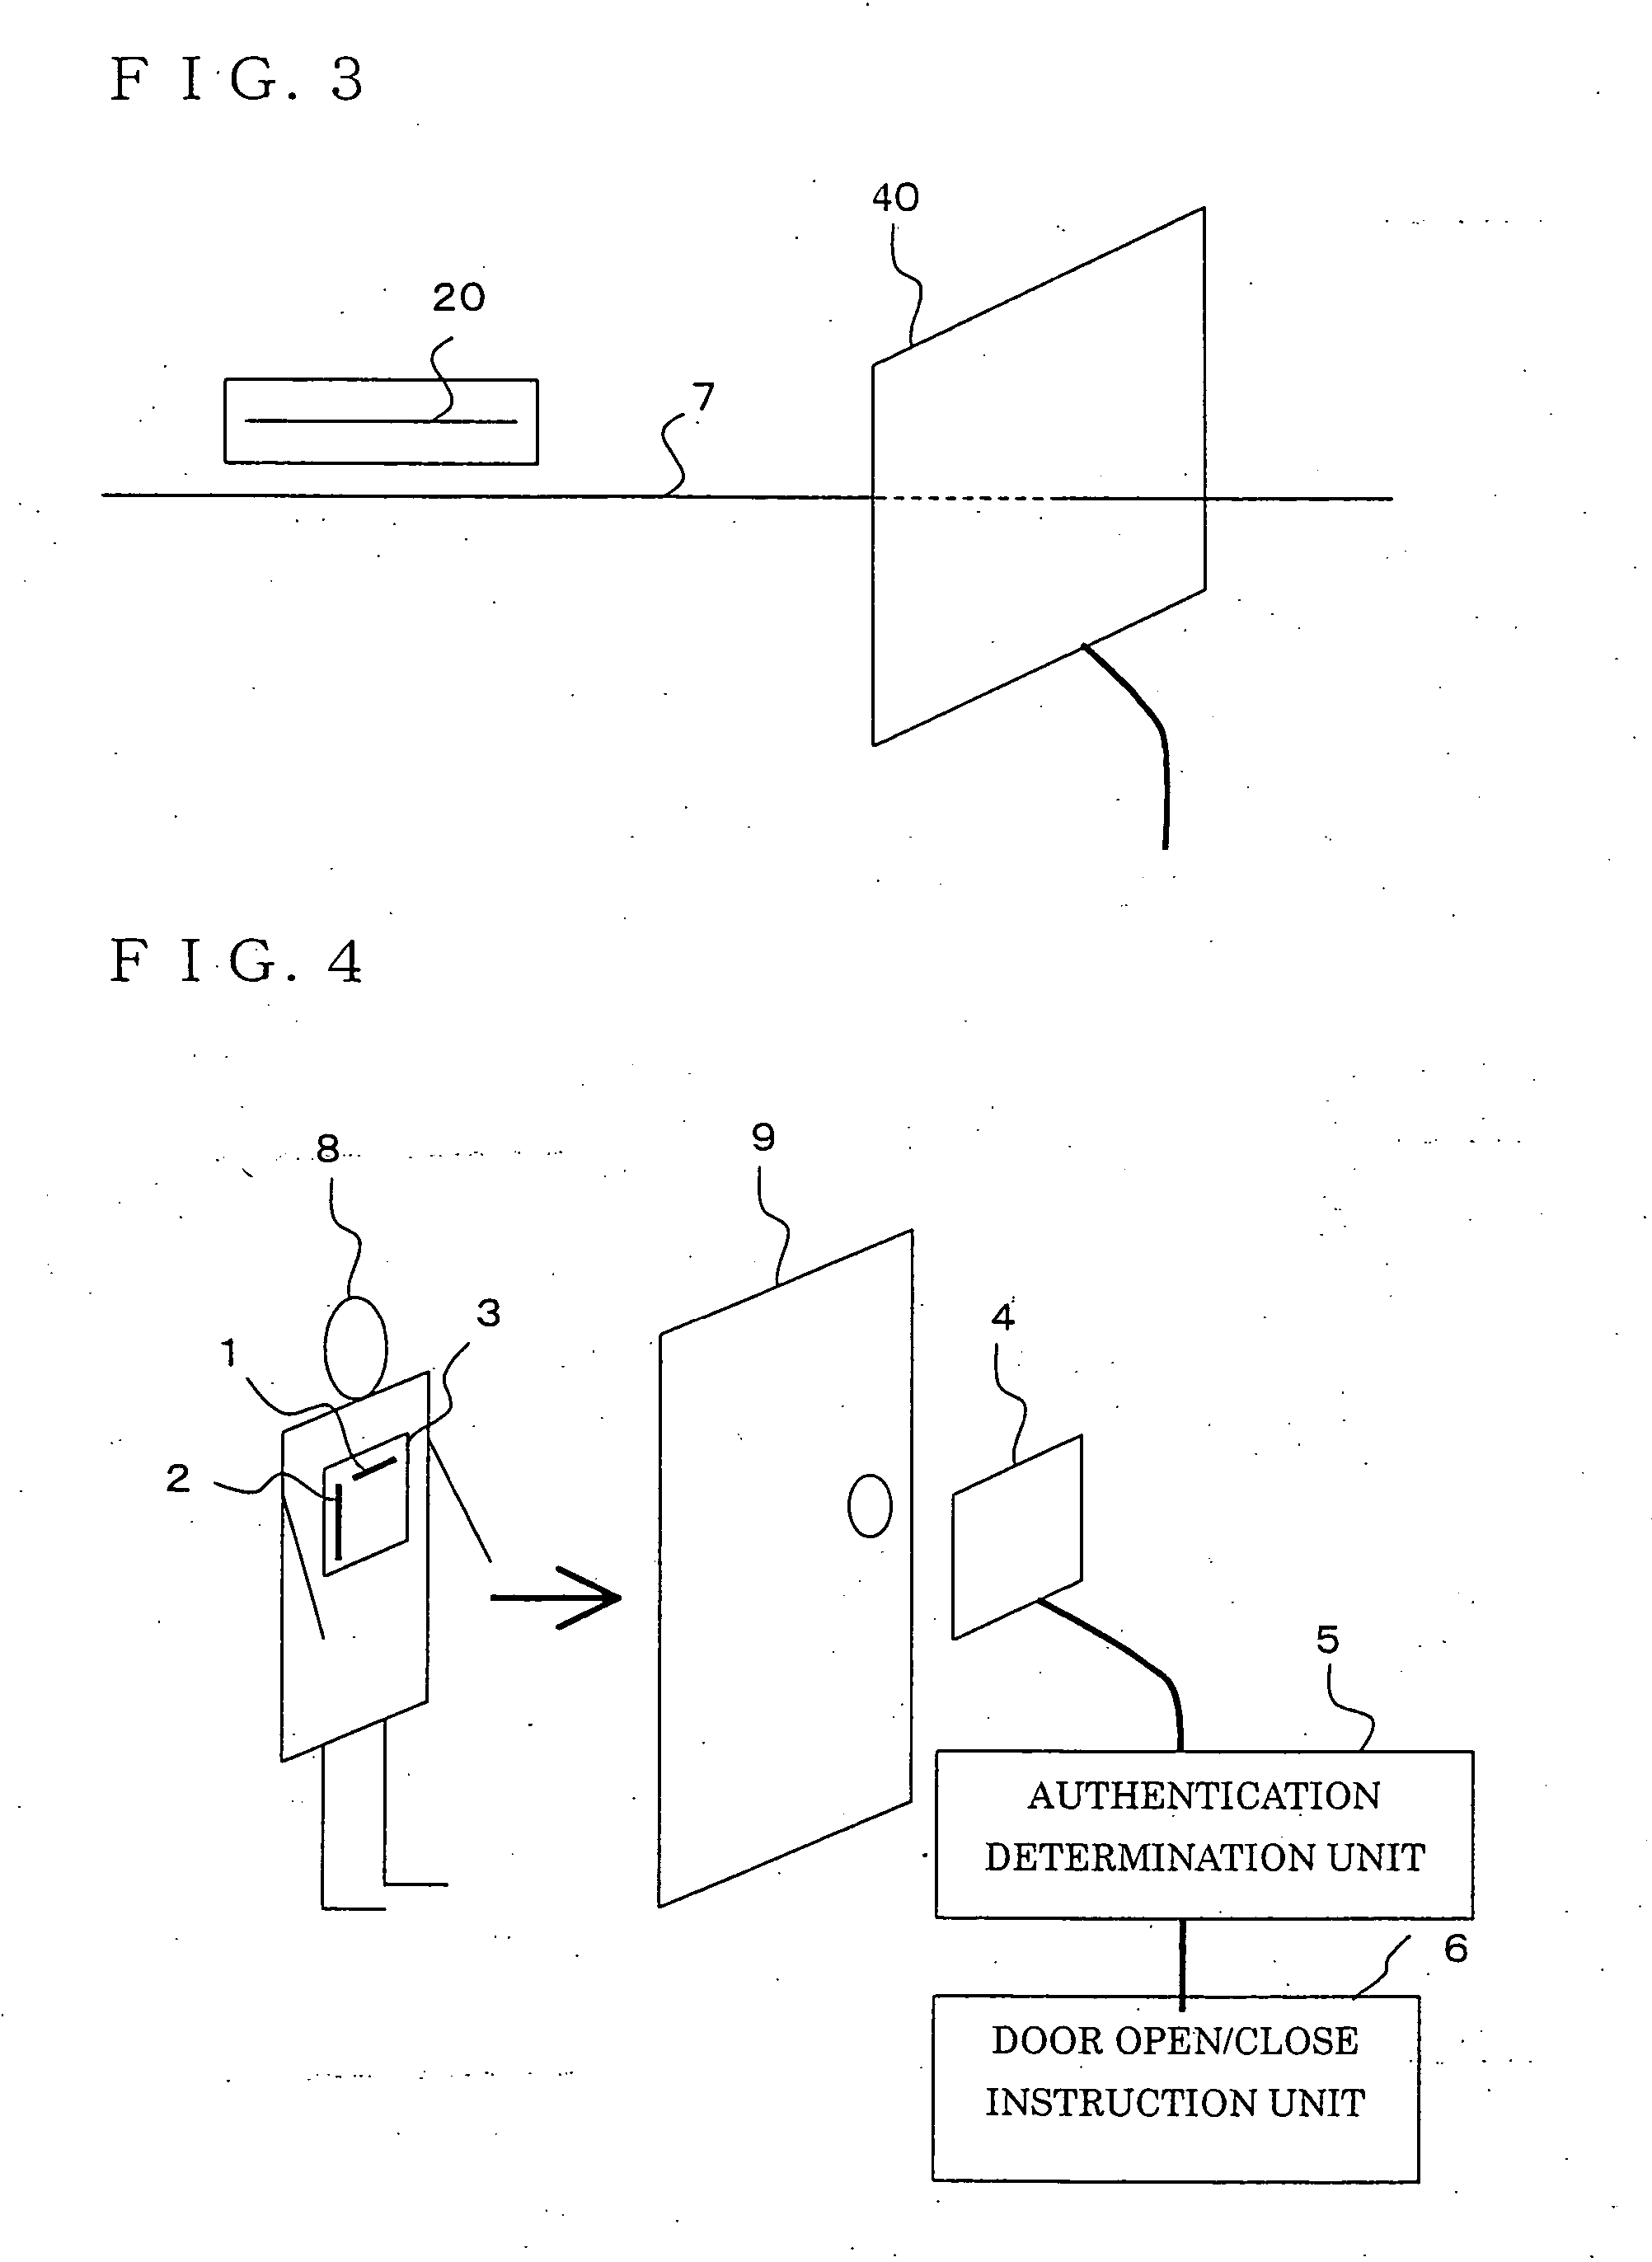 User authentication system and room entry/exit management system